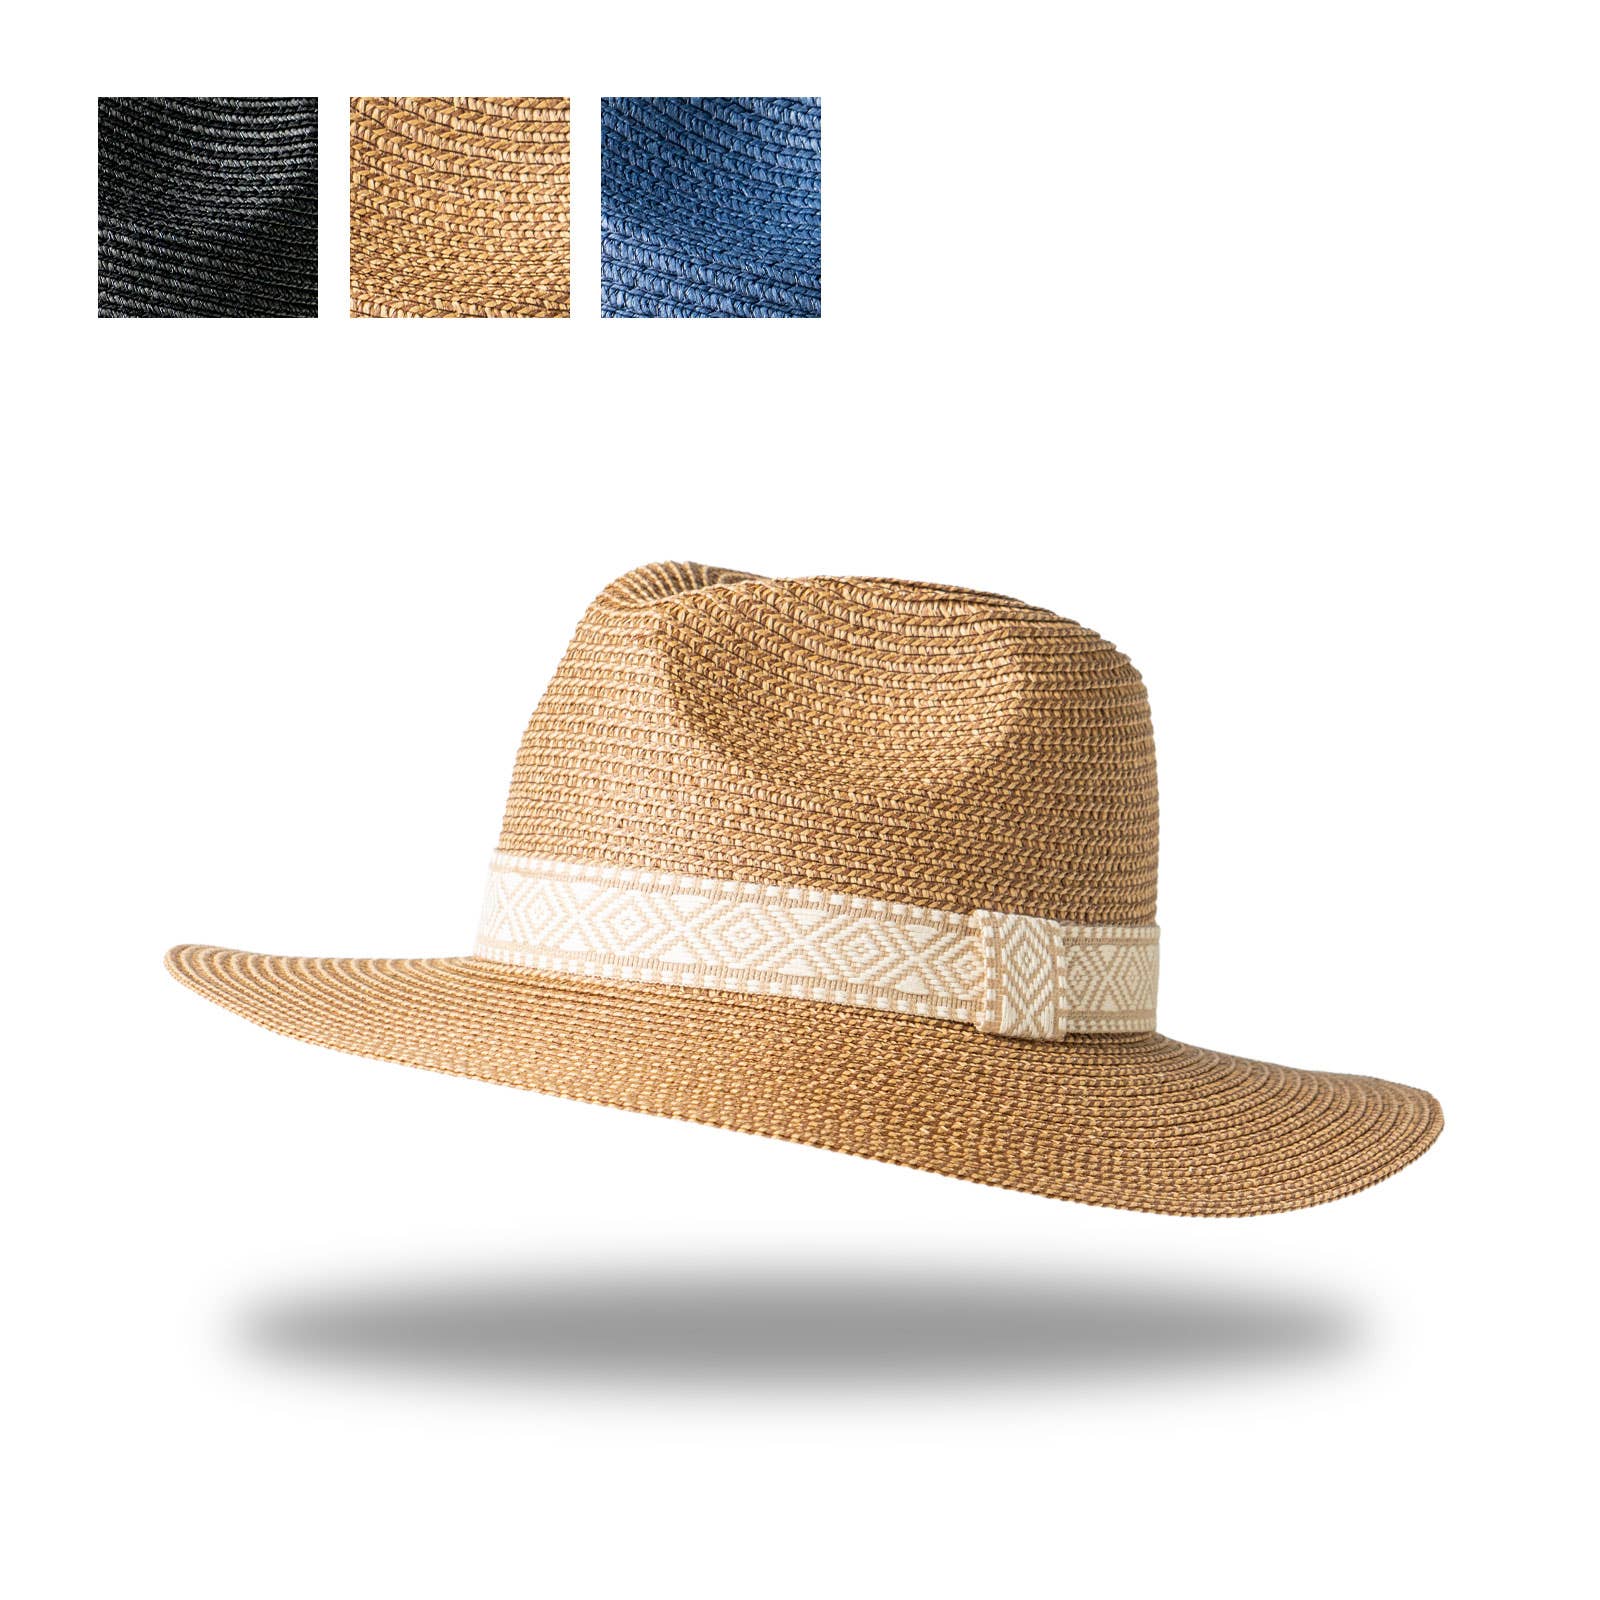 Panama Straw Panama Beach Hat For Women And Men Wide Brim Jazz Cap For  Spring And Summer Fashionable Outdoor Beach Sunwear In Wholesale Available  From Blackpearl888888, $7.21